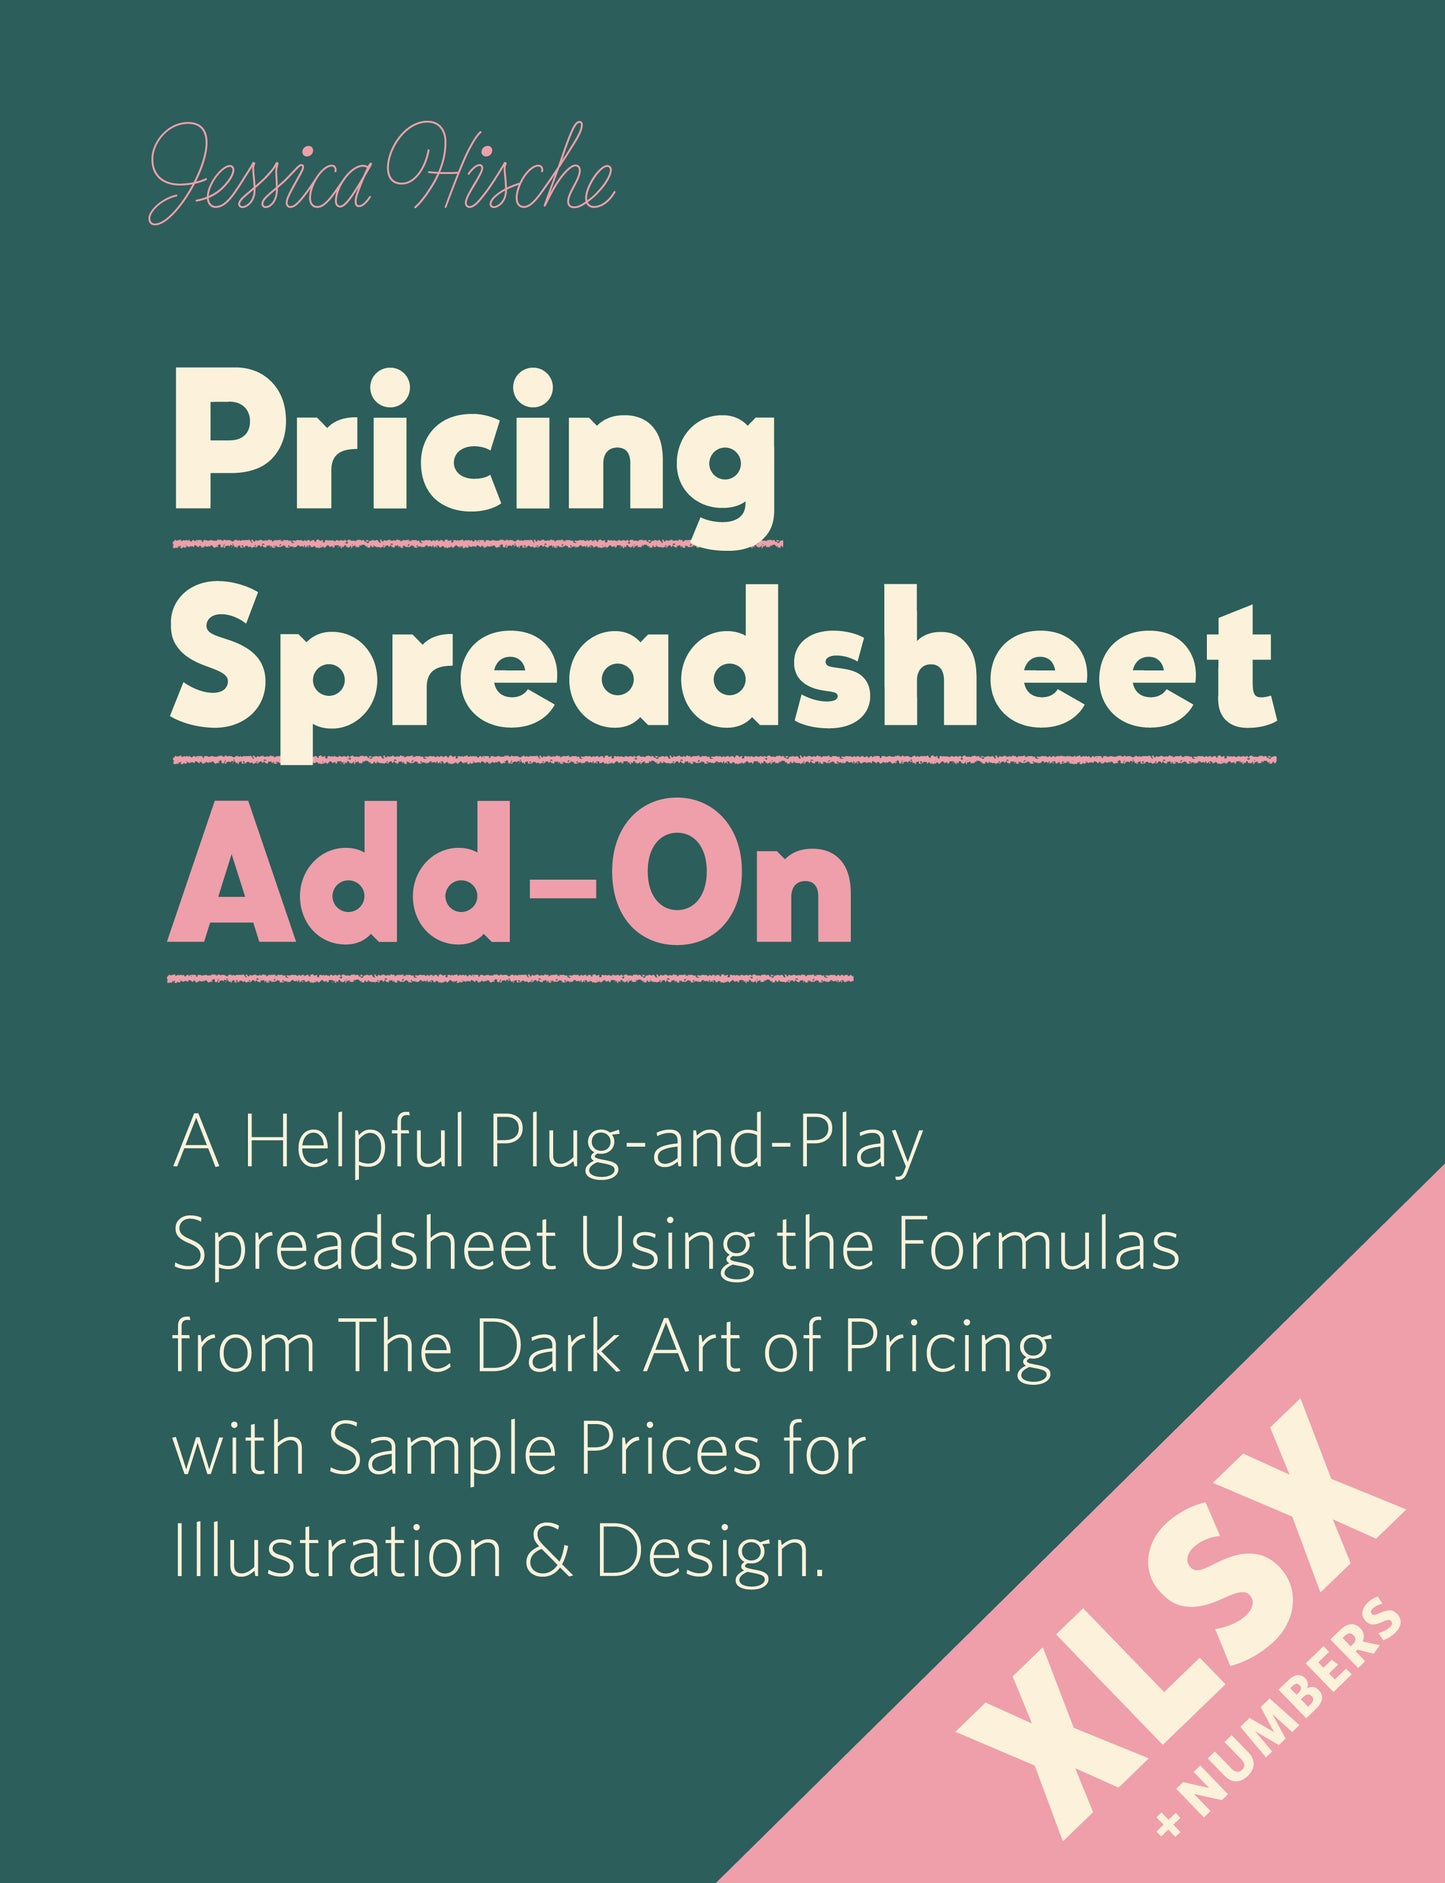 Pricing Spreadsheet Add-On